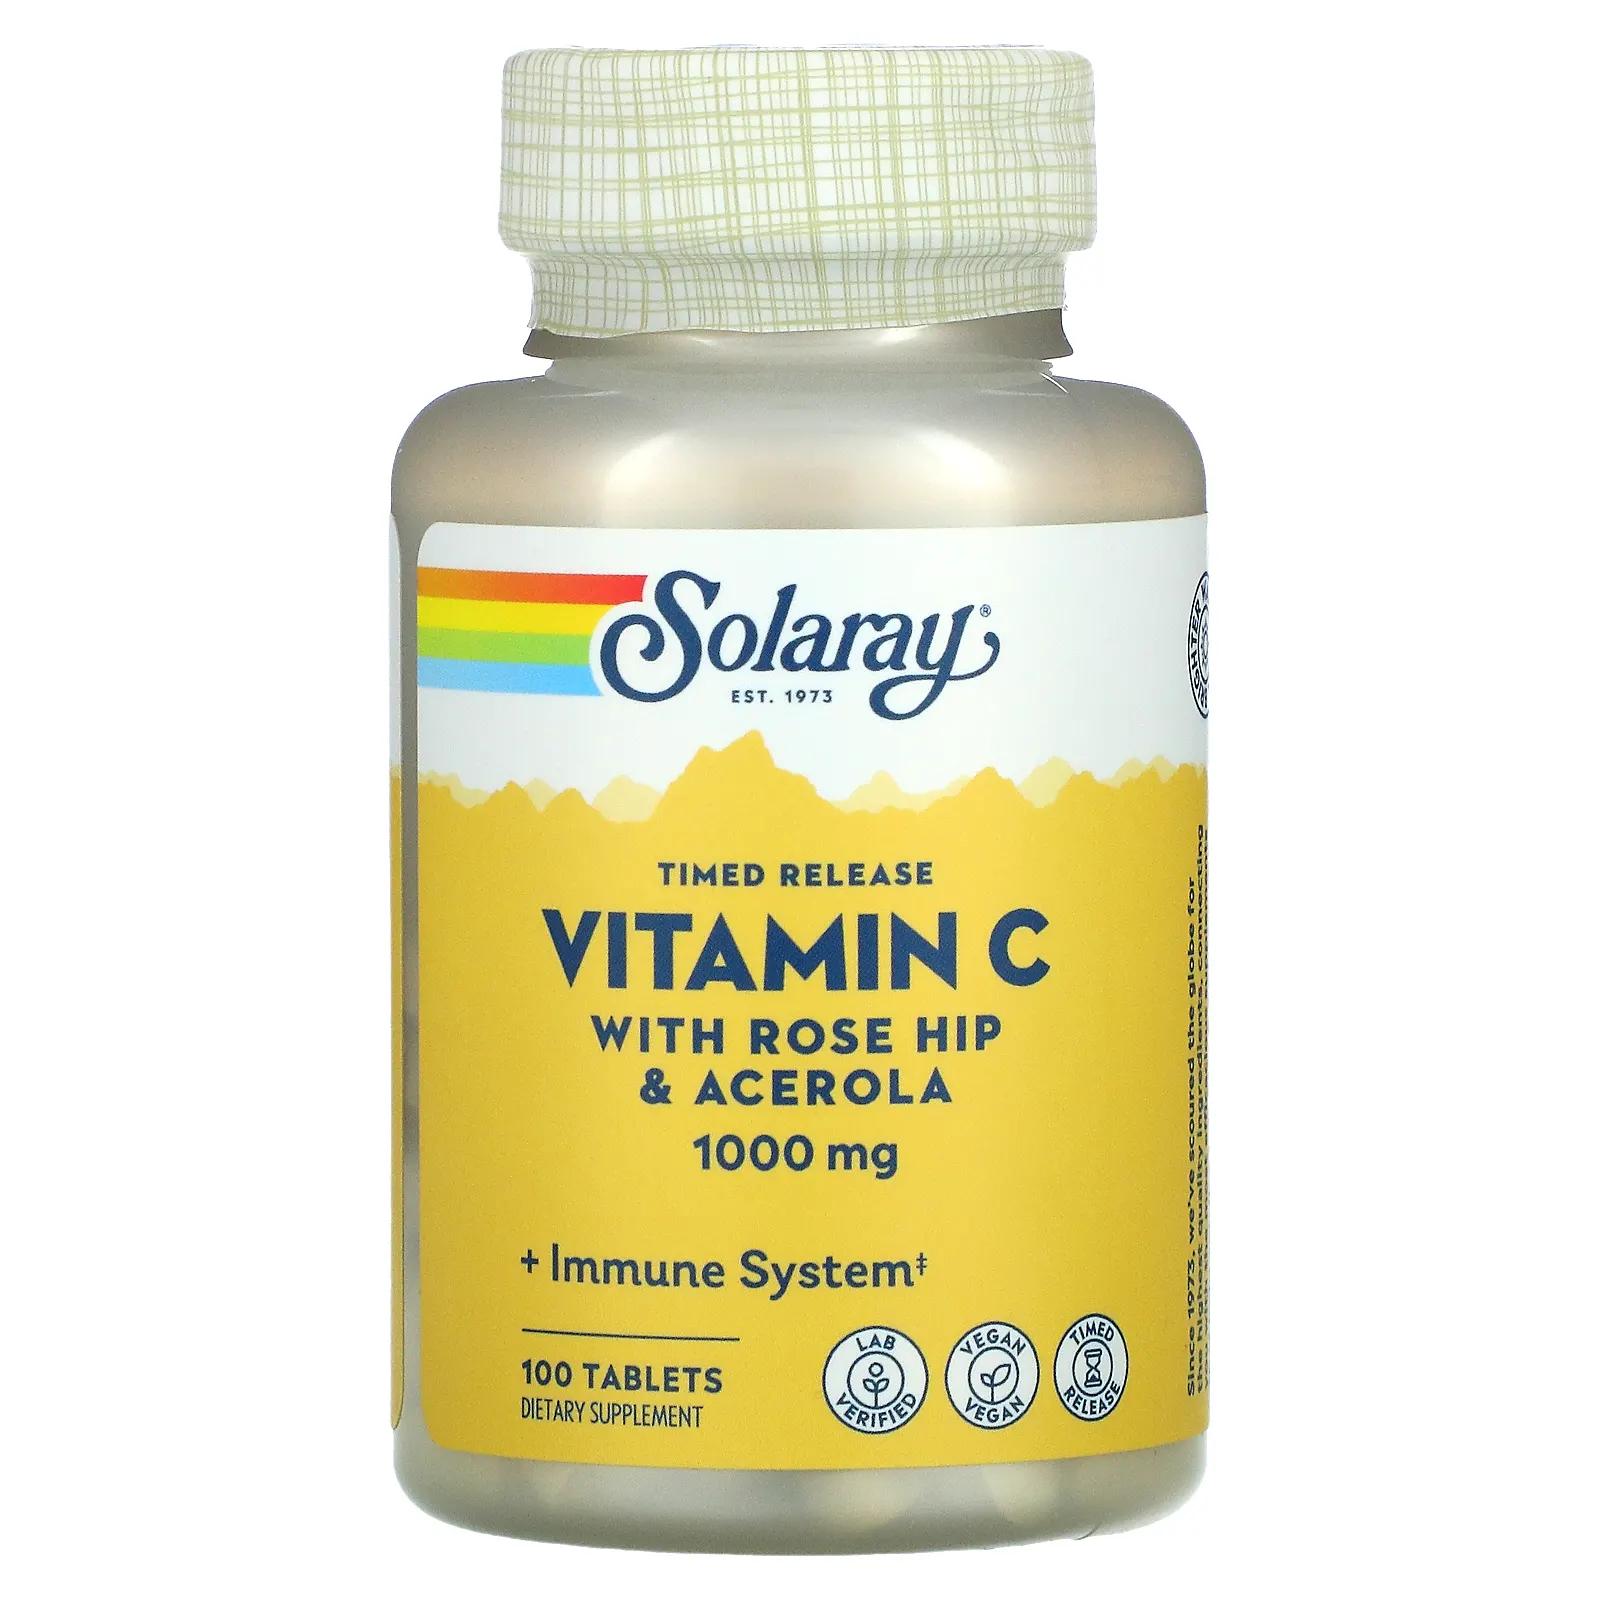 Solaray Vitamin C Timed-Release 1,000 mg 100 Tablets gnc vitamin c timed release 1 000 mg 90 vegetarian caplets